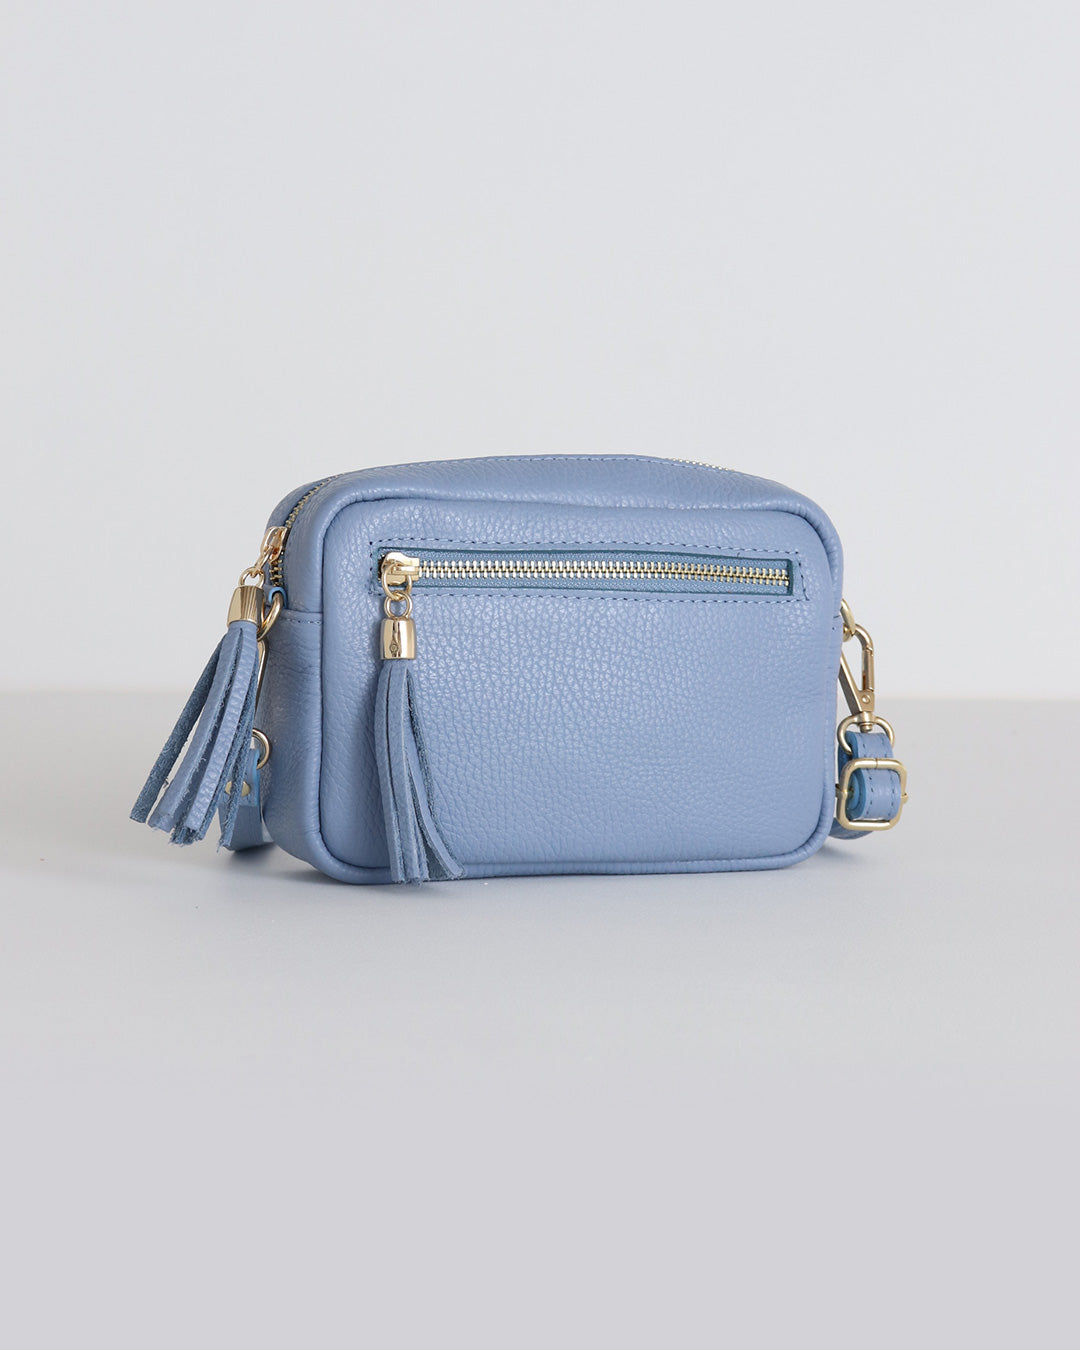 Light blue leather bag with shoulder strap, perfect for any occasion,  handmade in Ubrique